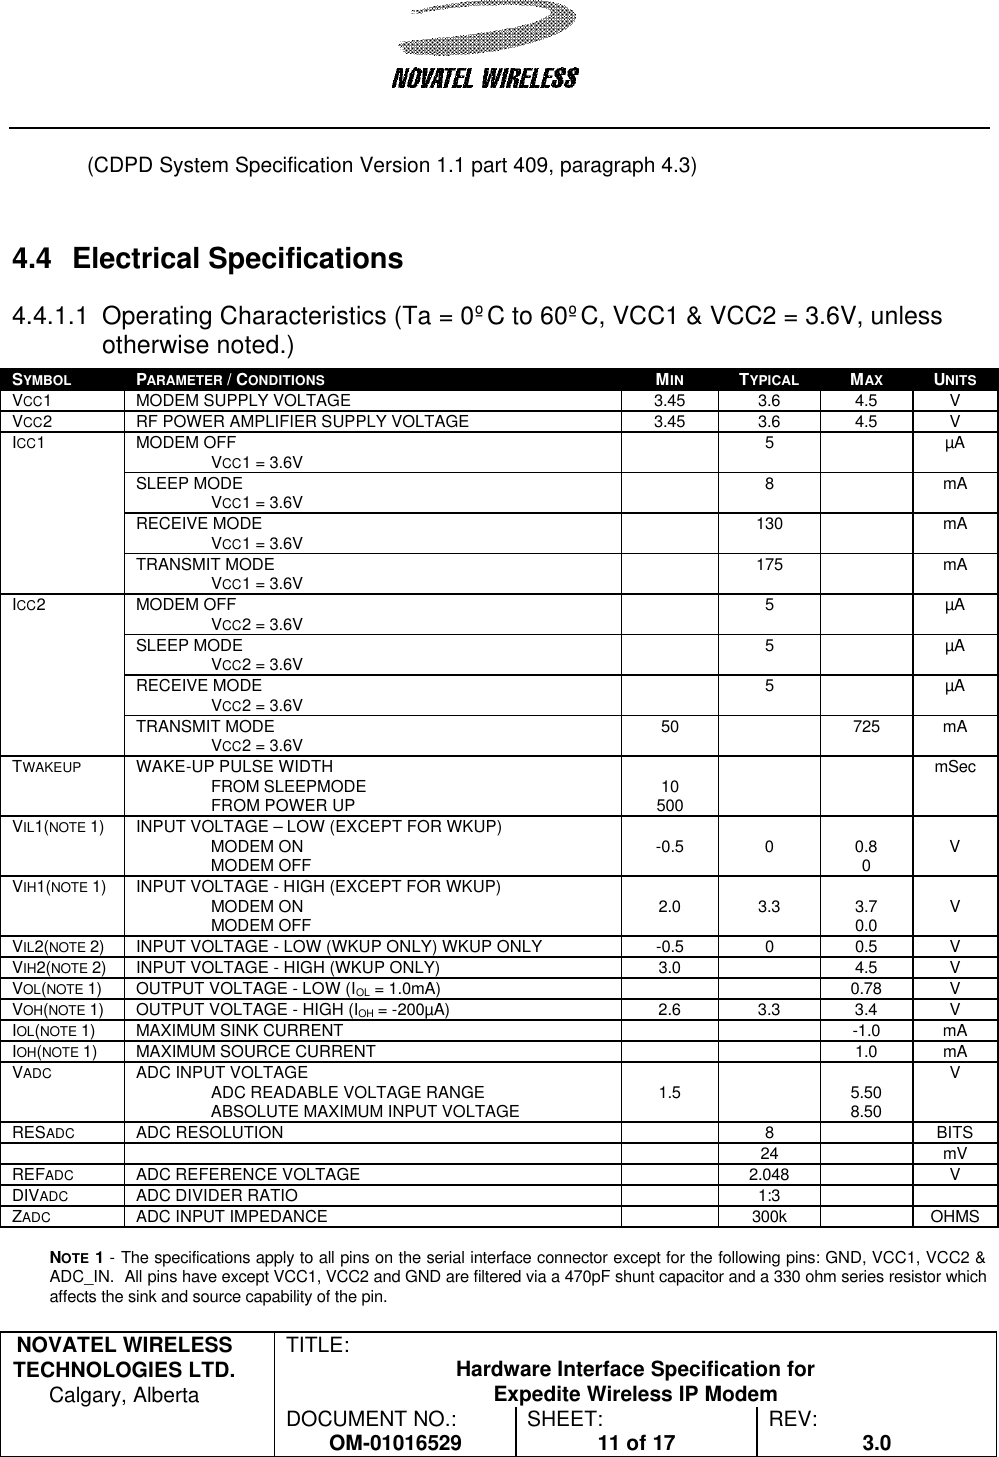   NOVATEL WIRELESS TECHNOLOGIES LTD.  Calgary, Alberta TITLE: Hardware Interface Specification for Expedite Wireless IP Modem  DOCUMENT NO.: OM-01016529 SHEET: 11 of 17 REV: 3.0    (CDPD System Specification Version 1.1 part 409, paragraph 4.3)   4.4 Electrical Specifications 4.4.1.1 Operating Characteristics (Ta = 0ºC to 60ºC, VCC1 &amp; VCC2 = 3.6V, unless otherwise noted.) SYMBOL PARAMETER / CONDITIONS MIN  TYPICAL MAX UNITS VCC1 MODEM SUPPLY VOLTAGE 3.45 3.6 4.5 V VCC2 RF POWER AMPLIFIER SUPPLY VOLTAGE 3.45 3.6 4.5 V MODEM OFF VCC1 = 3.6V  5    µA SLEEP MODE VCC1 = 3.6V  8    mA RECEIVE MODE  VCC1 = 3.6V  130   mA ICC1 TRANSMIT MODE  VCC1 = 3.6V  175    mA MODEM OFF VCC2 = 3.6V  5    µA SLEEP MODE  VCC2 = 3.6V  5     µA RECEIVE MODE VCC2 = 3.6V  5     µA ICC2 TRANSMIT MODE VCC2 = 3.6V 50    725 mA TWAKEUP  WAKE-UP PULSE WIDTH FROM SLEEPMODE FROM POWER UP  10 500     mSec VIL1(NOTE 1) INPUT VOLTAGE – LOW (EXCEPT FOR WKUP) MODEM ON MODEM OFF  -0.5  0  0.8 0  V VIH1(NOTE 1) INPUT VOLTAGE - HIGH (EXCEPT FOR WKUP) MODEM ON MODEM OFF  2.0   3.3   3.7 0.0  V VIL2(NOTE 2) INPUT VOLTAGE - LOW (WKUP ONLY) WKUP ONLY -0.5 0 0.5 V VIH2(NOTE 2) INPUT VOLTAGE - HIGH (WKUP ONLY) 3.0    4.5 V VOL(NOTE 1) OUTPUT VOLTAGE - LOW (IOL = 1.0mA)      0.78 V VOH(NOTE 1) OUTPUT VOLTAGE - HIGH (IOH = -200µA) 2.6 3.3 3.4 V IOL(NOTE 1) MAXIMUM SINK CURRENT      -1.0 mA IOH(NOTE 1) MAXIMUM SOURCE CURRENT      1.0 mA VADC ADC INPUT VOLTAGE ADC READABLE VOLTAGE RANGE ABSOLUTE MAXIMUM INPUT VOLTAGE  1.5    5.50 8.50 V RESADC ADC RESOLUTION    8    BITS       24    mV REFADC ADC REFERENCE VOLTAGE    2.048    V DIVADC ADC DIVIDER RATIO    1:3     ZADC ADC INPUT IMPEDANCE    300k    OHMS  NOTE 1 - The specifications apply to all pins on the serial interface connector except for the following pins: GND, VCC1, VCC2 &amp; ADC_IN.  All pins have except VCC1, VCC2 and GND are filtered via a 470pF shunt capacitor and a 330 ohm series resistor which affects the sink and source capability of the pin.  